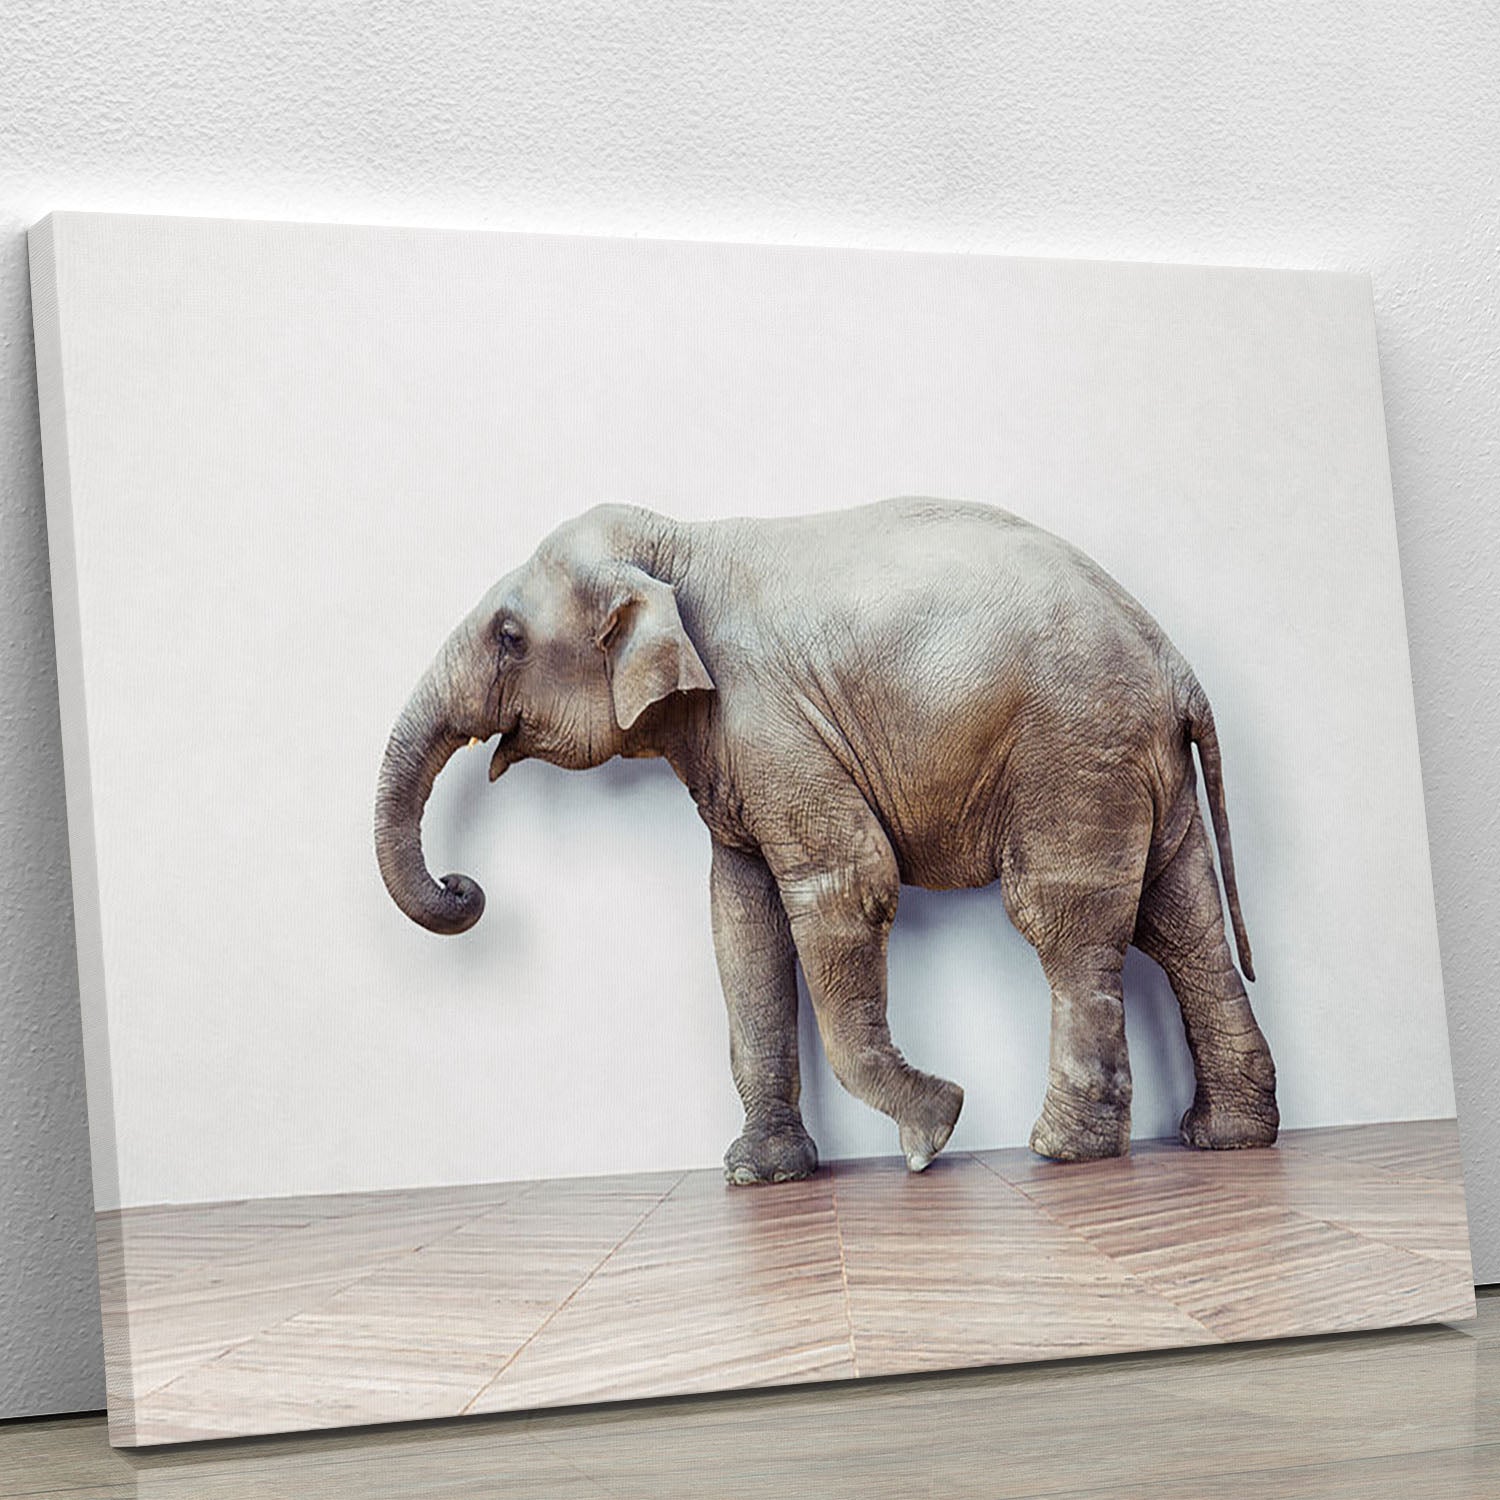 The elephant calm in the room near white wall Canvas Print or Poster - Canvas Art Rocks - 1